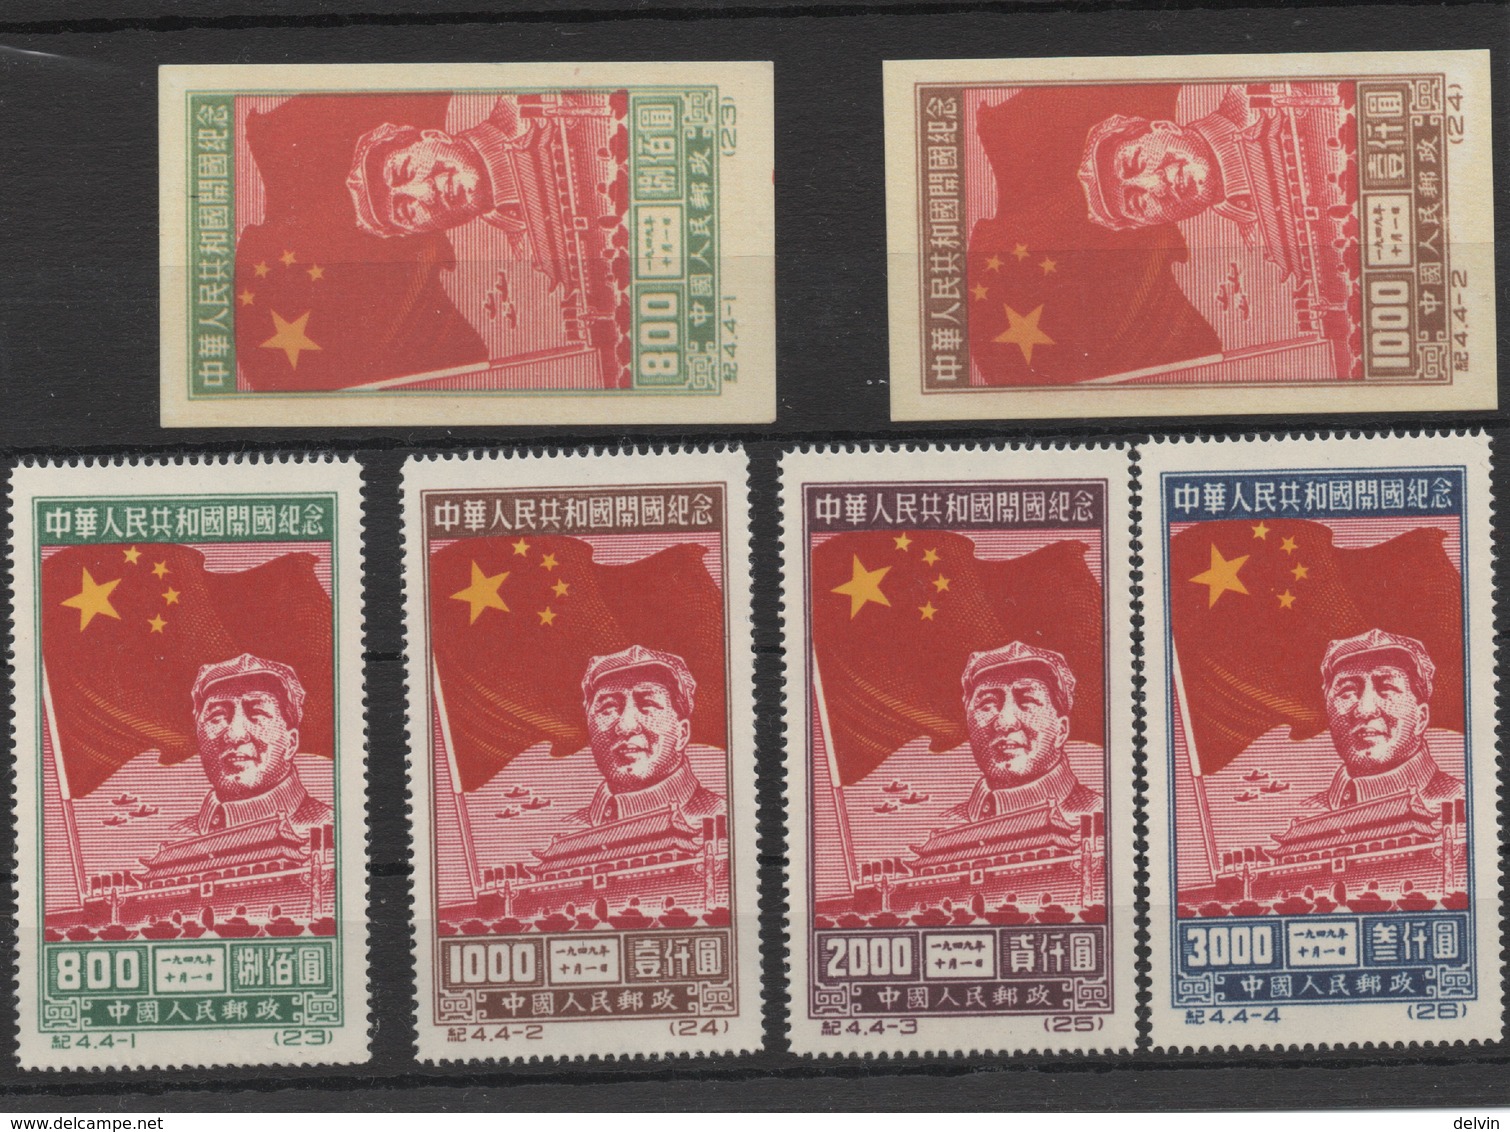 China 1950-Mao Tze Tung And Flag -3 Complete Sets Of 18 Stamps Perf.& Imperf. Reprint Of The Era. New No Gum (see Photo) - Official Reprints